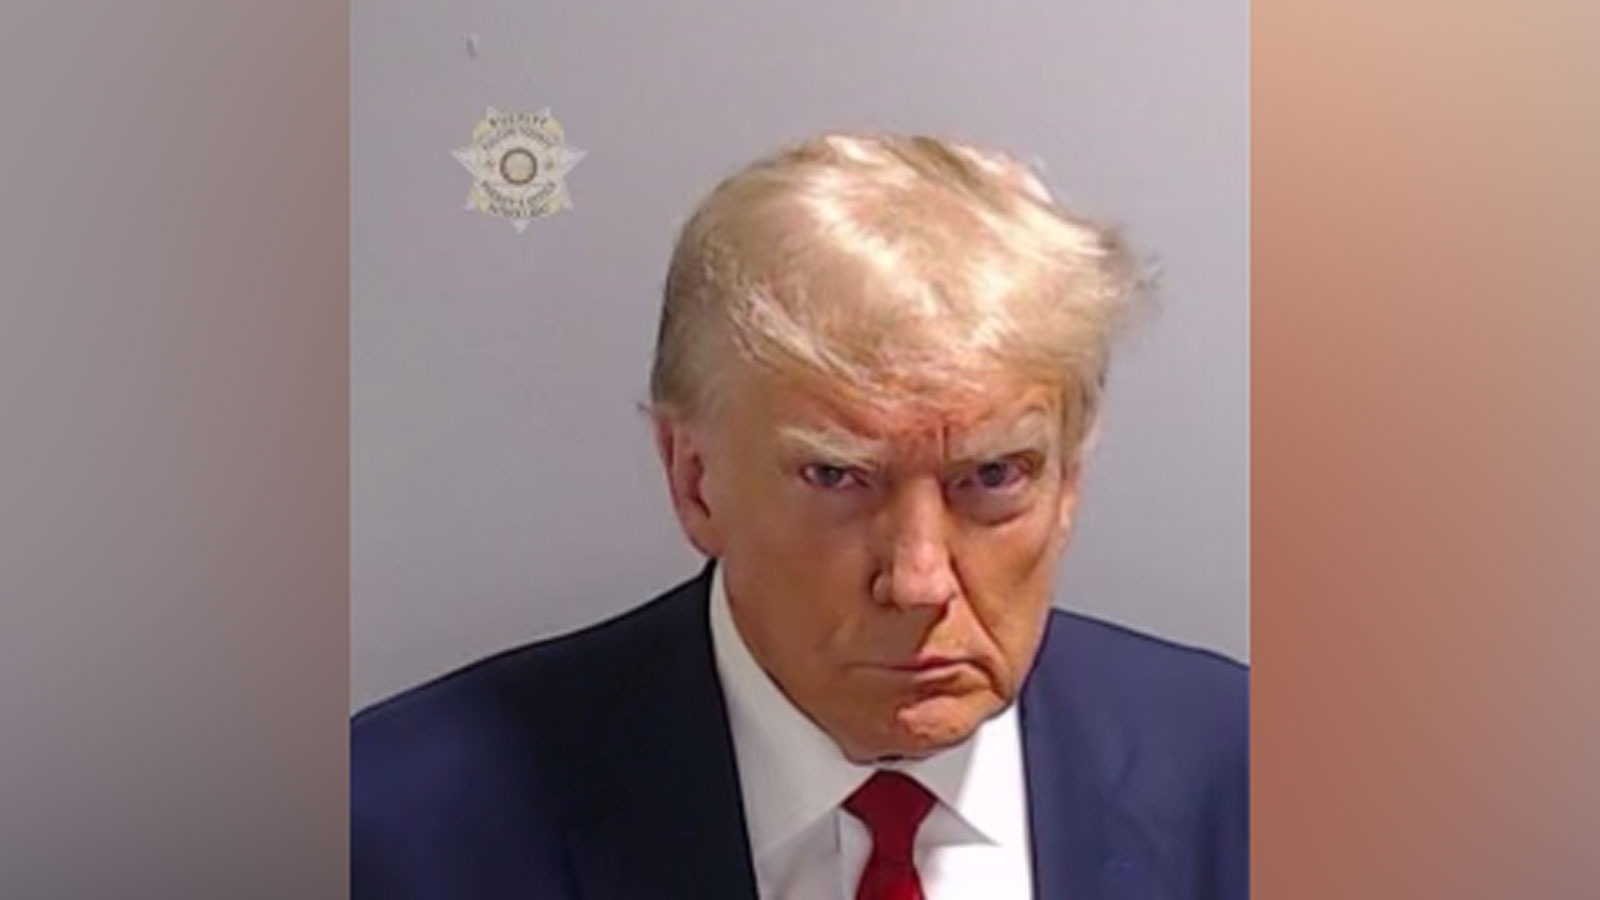 Trump turns himself in at the Fulton County Jail